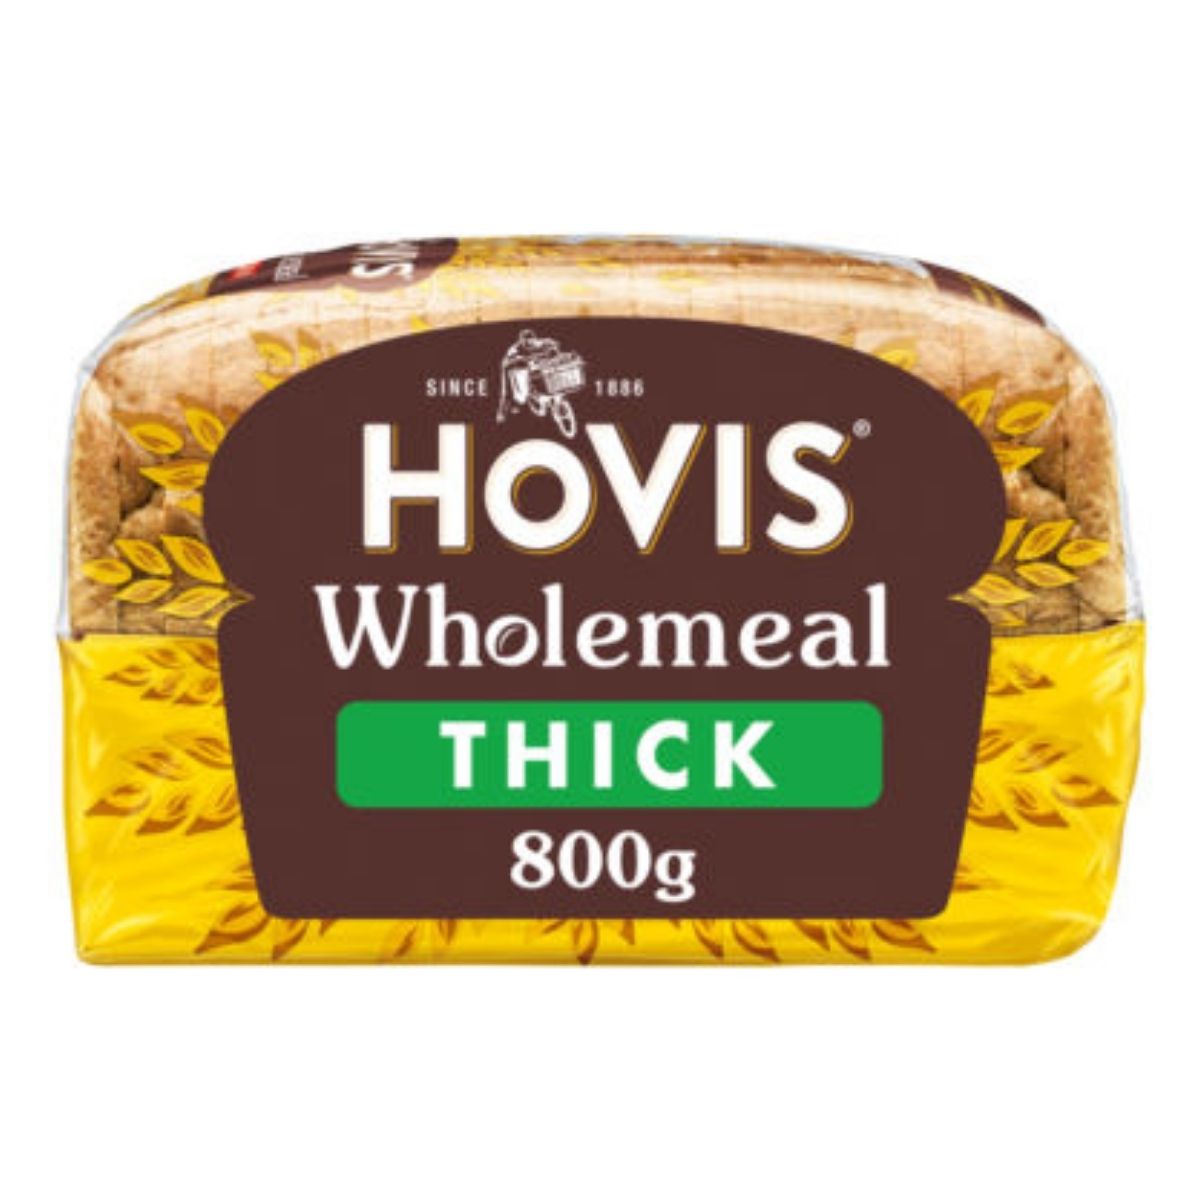 Hovis Thick Wholemeal Bread - 800ml.